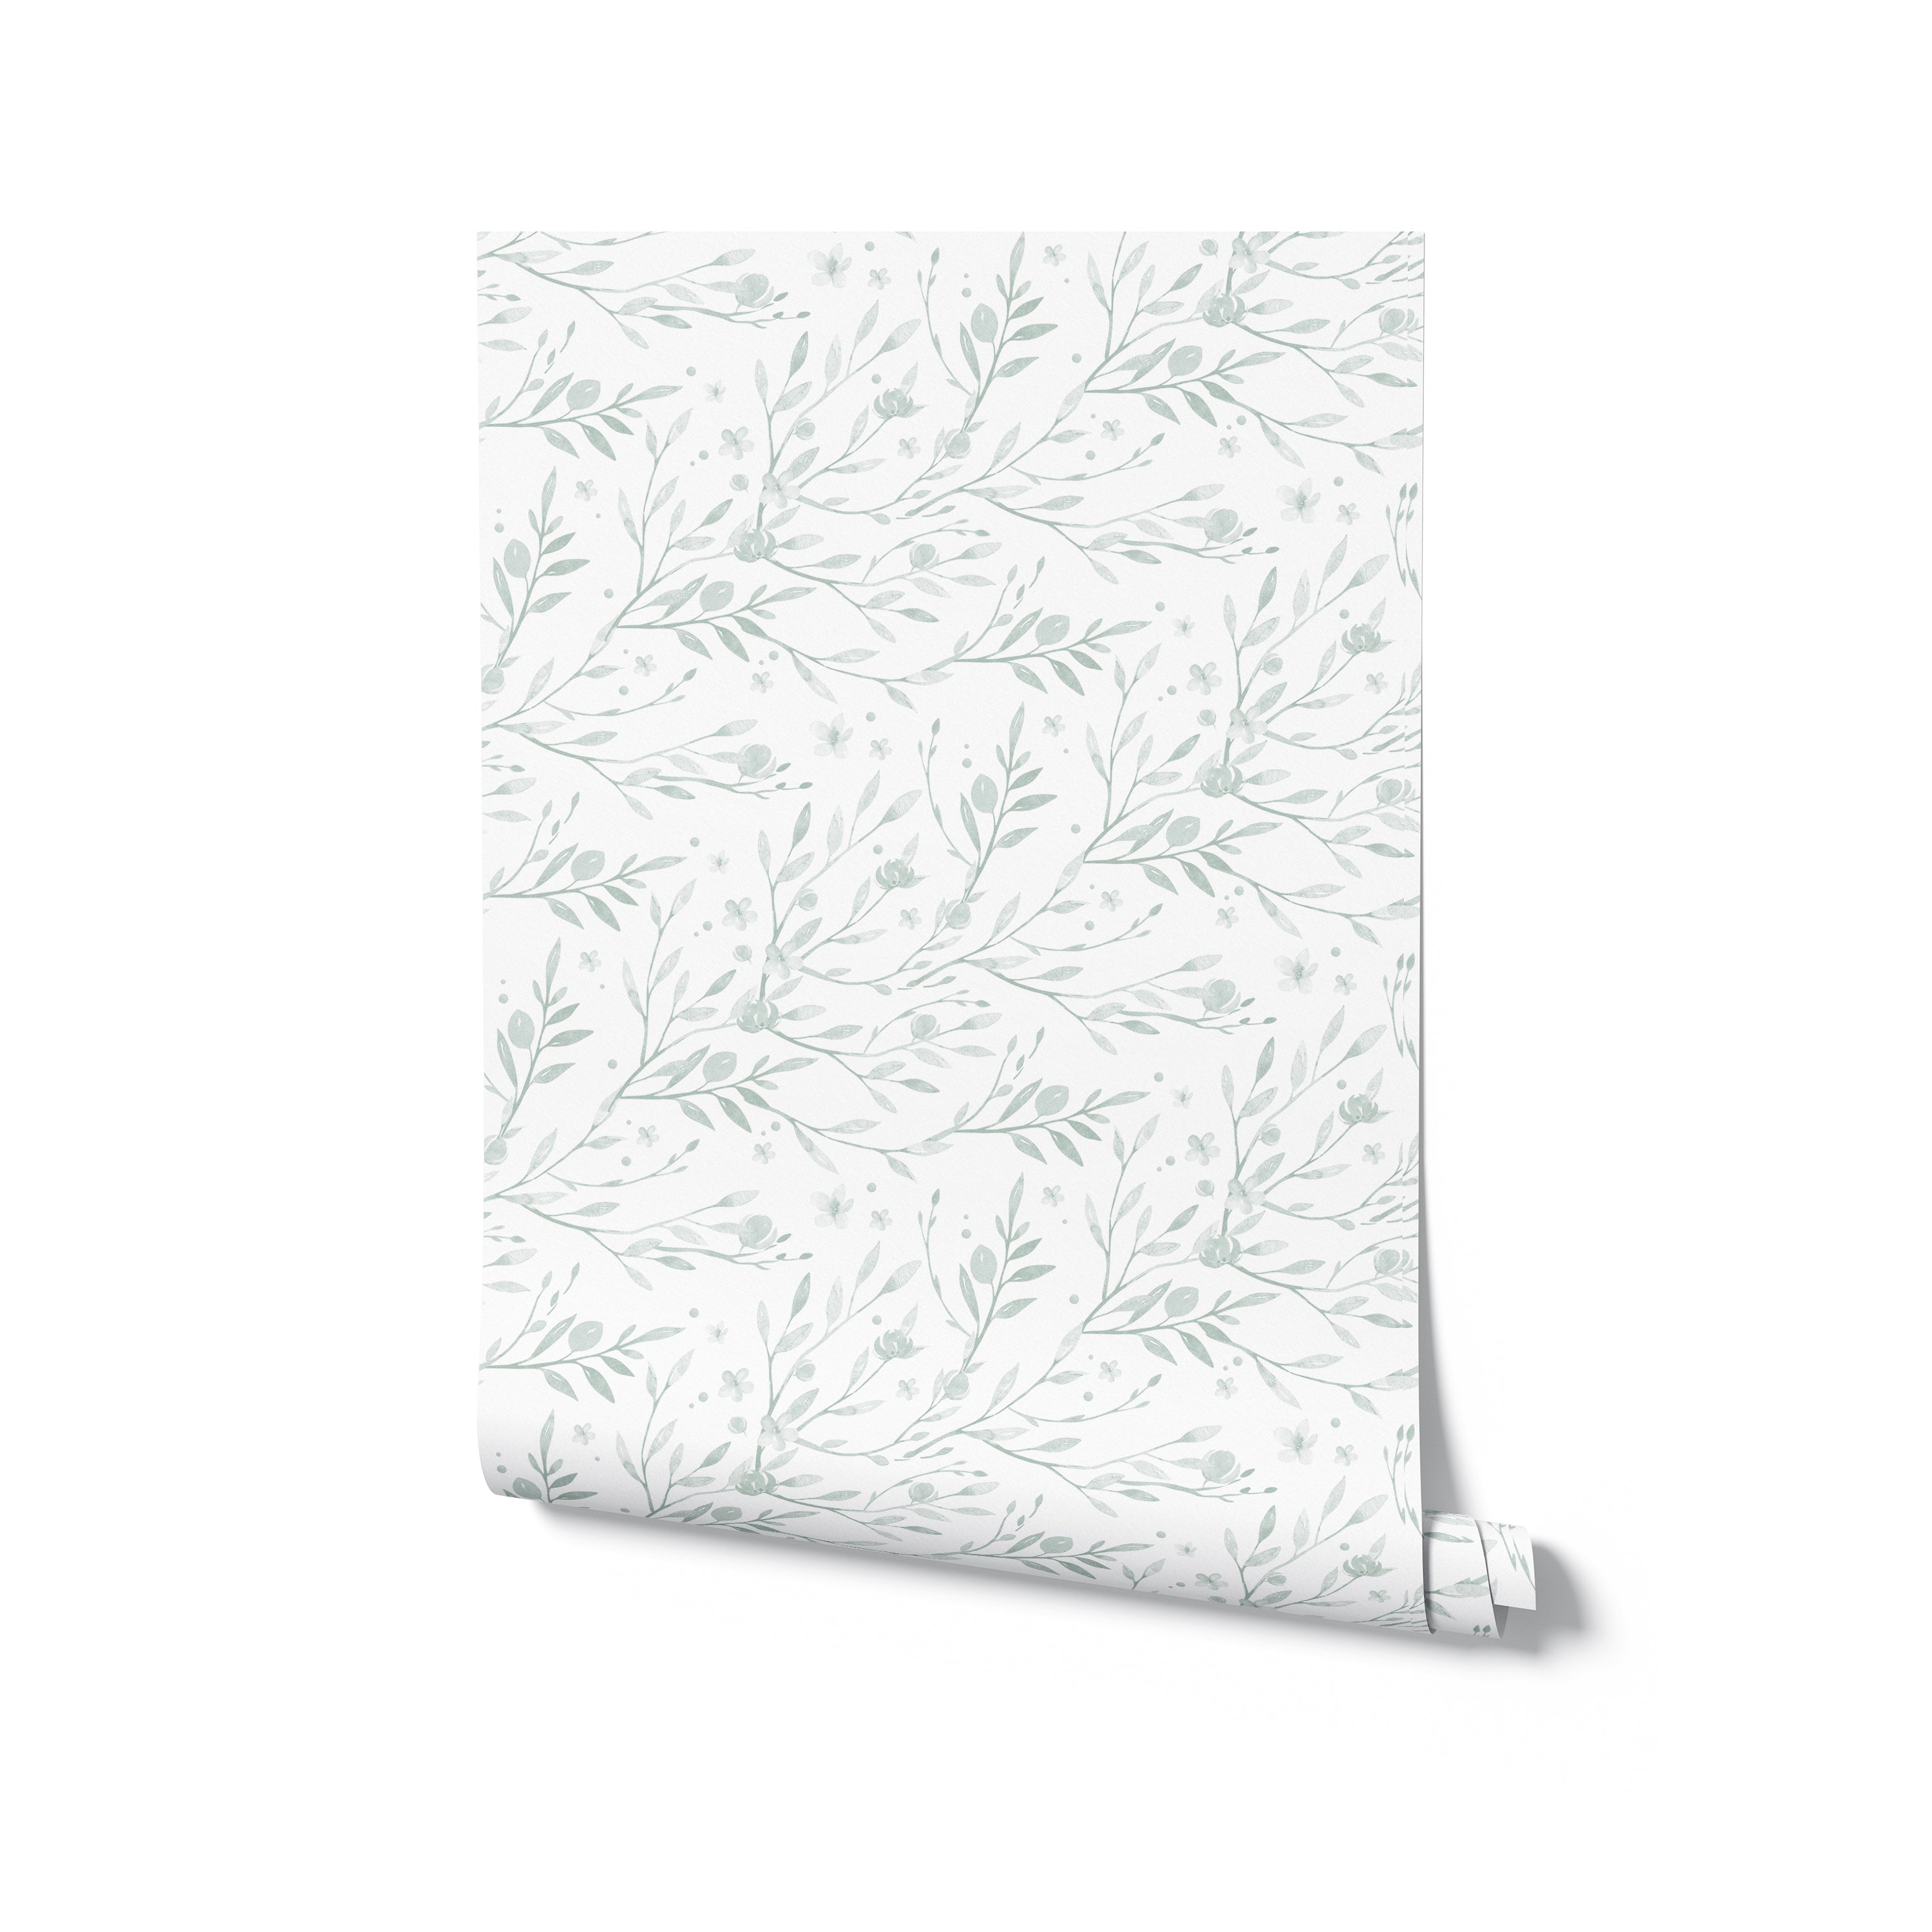 A rolled piece of Watercolor Spring Bird Wallpaper - Seafoam, revealing the subtle, painterly details of the leaves and florals, ready to transform a room with its soothing color and pattern